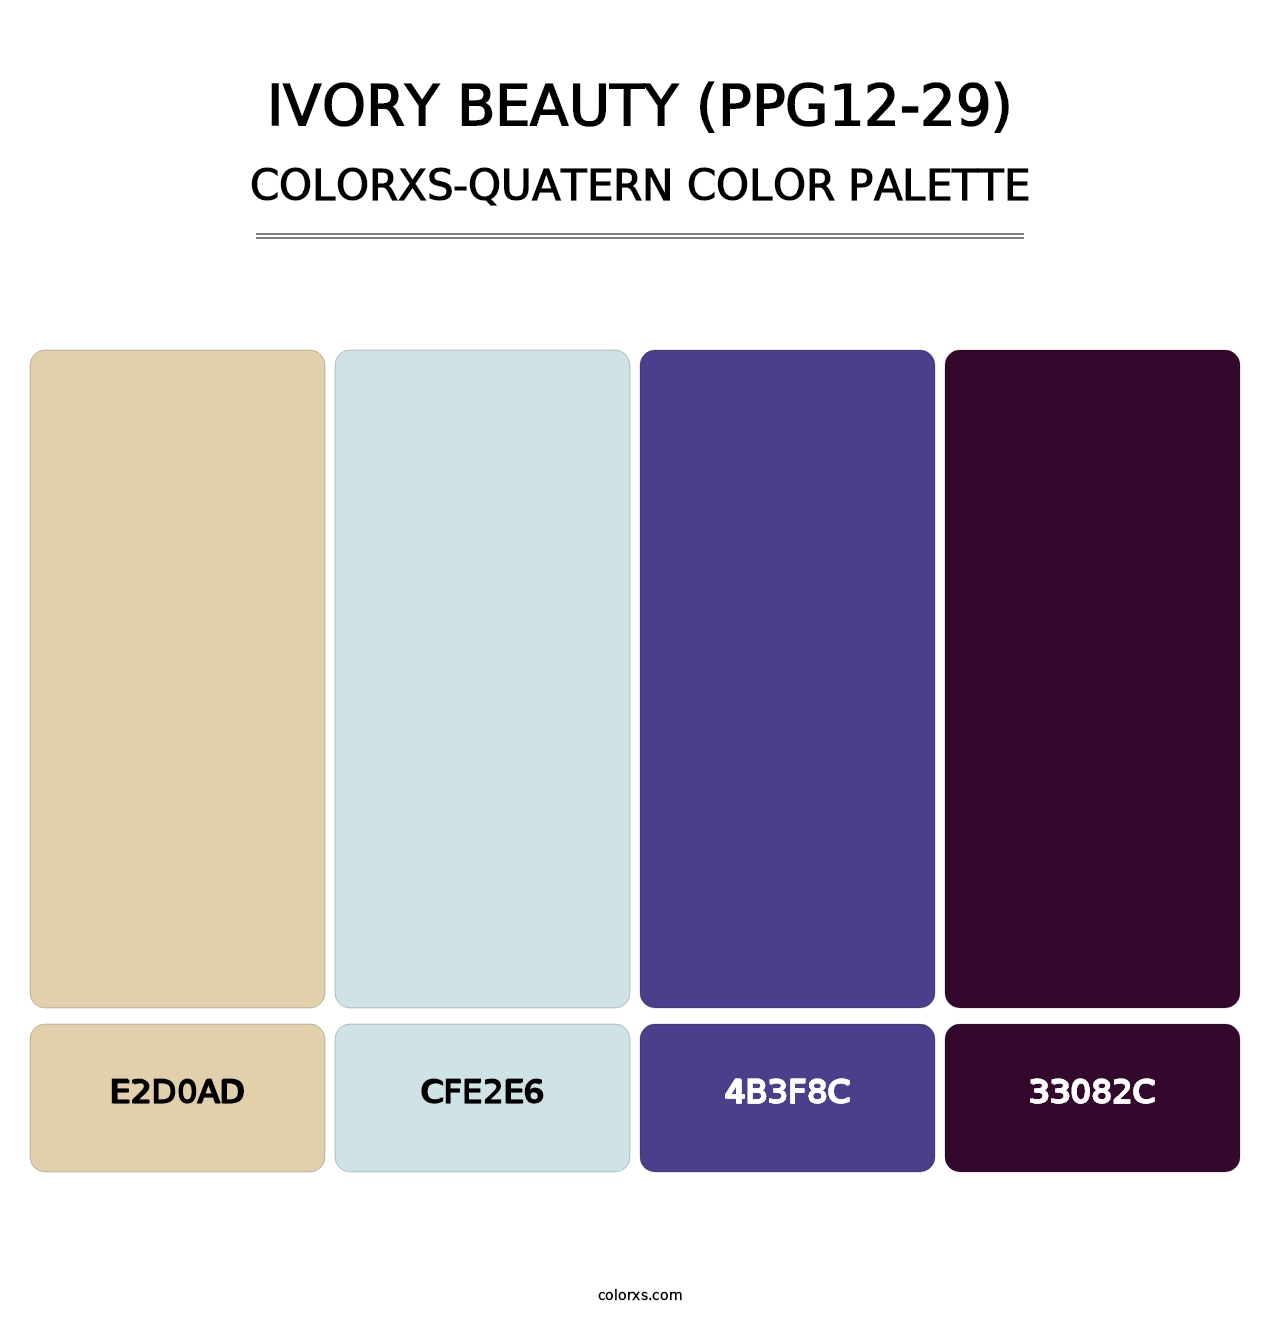 Ivory Beauty (PPG12-29) - Colorxs Quatern Palette